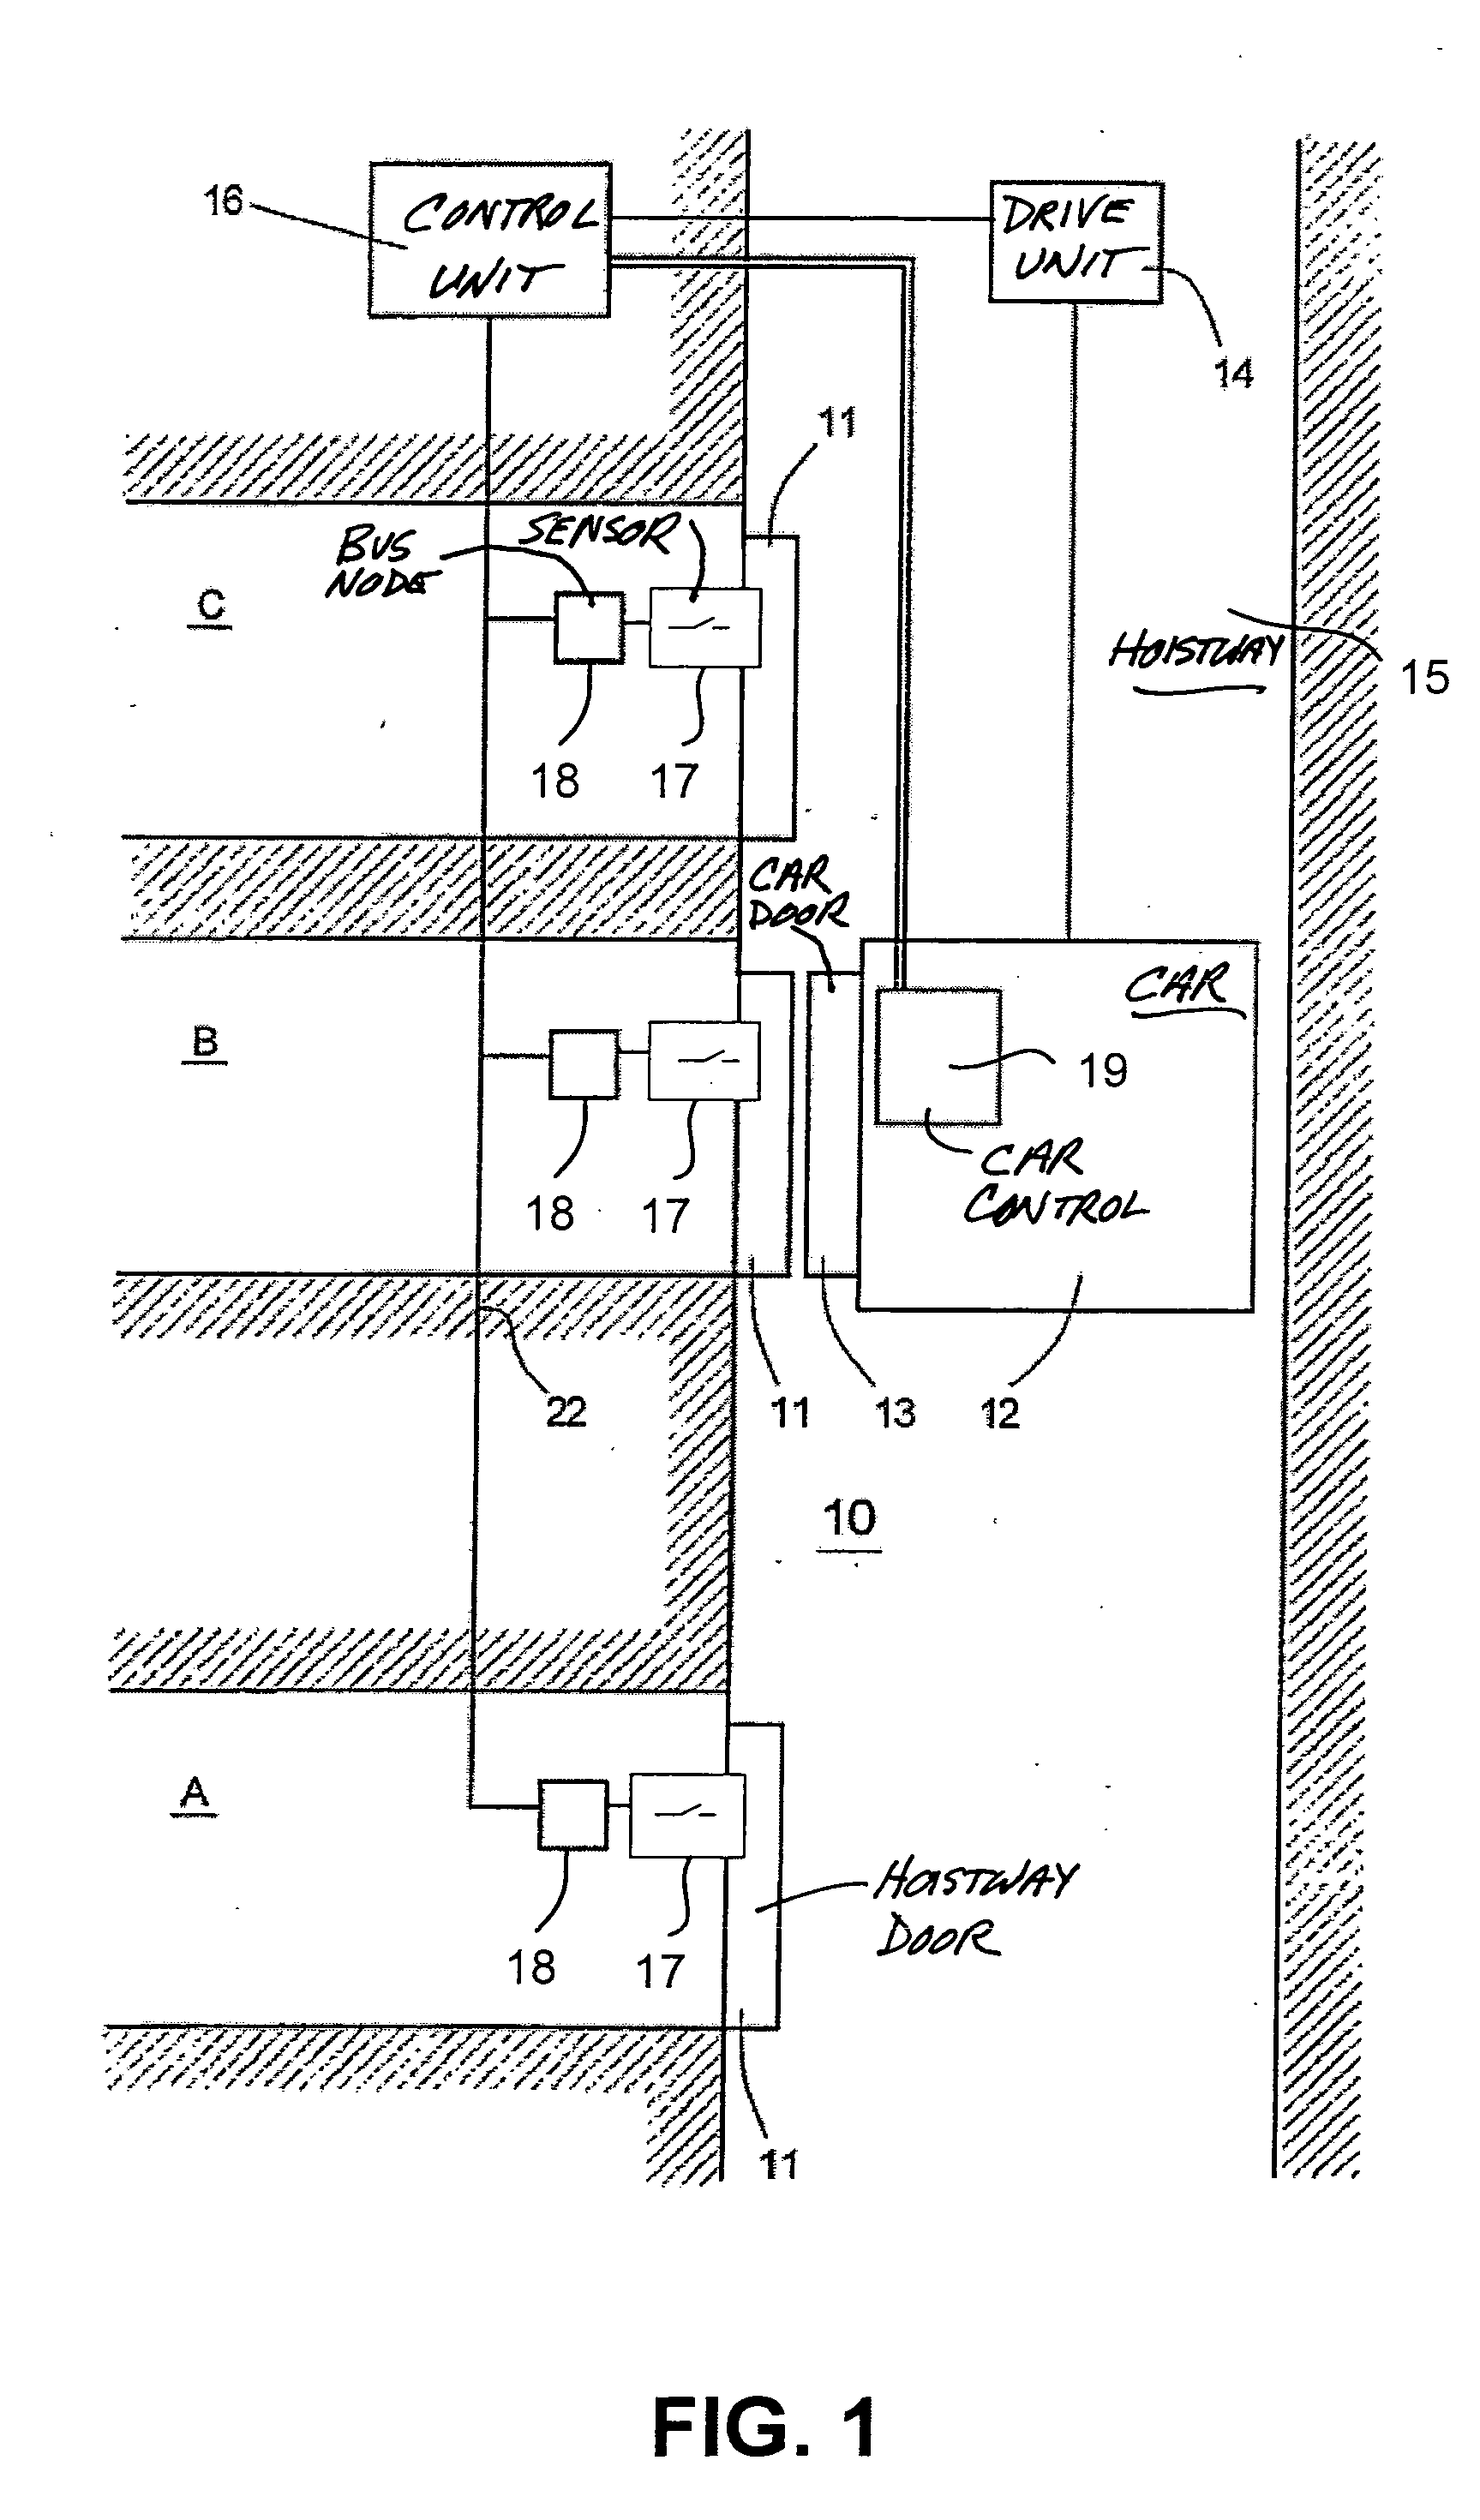 Elevator installation and monitoring system for an elevator installation